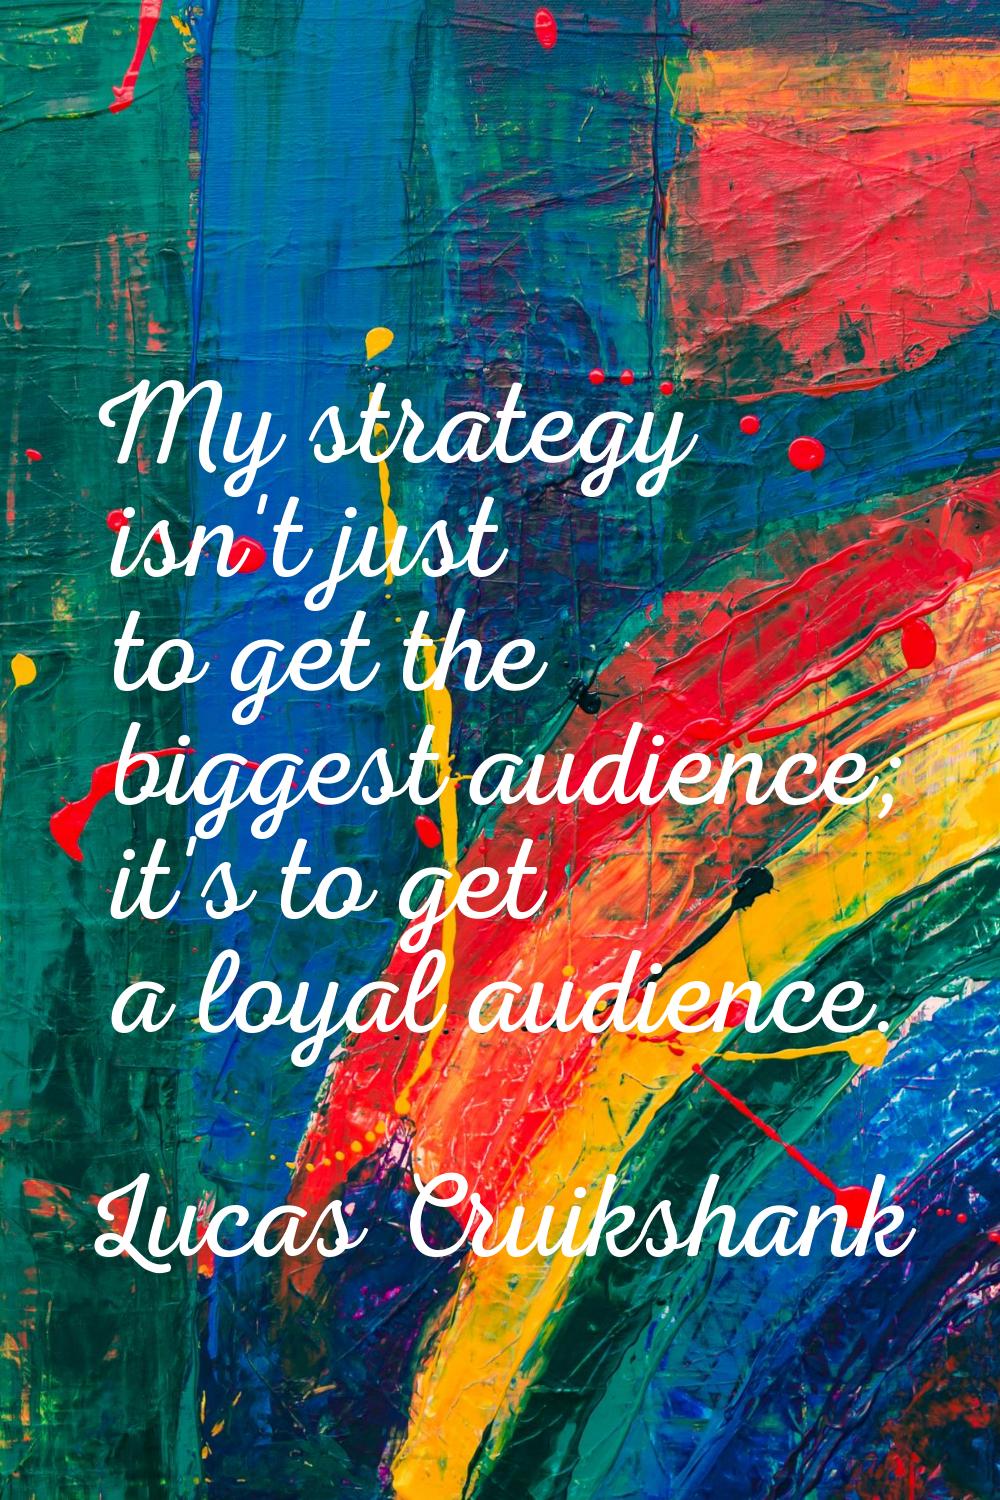 My strategy isn't just to get the biggest audience; it's to get a loyal audience.